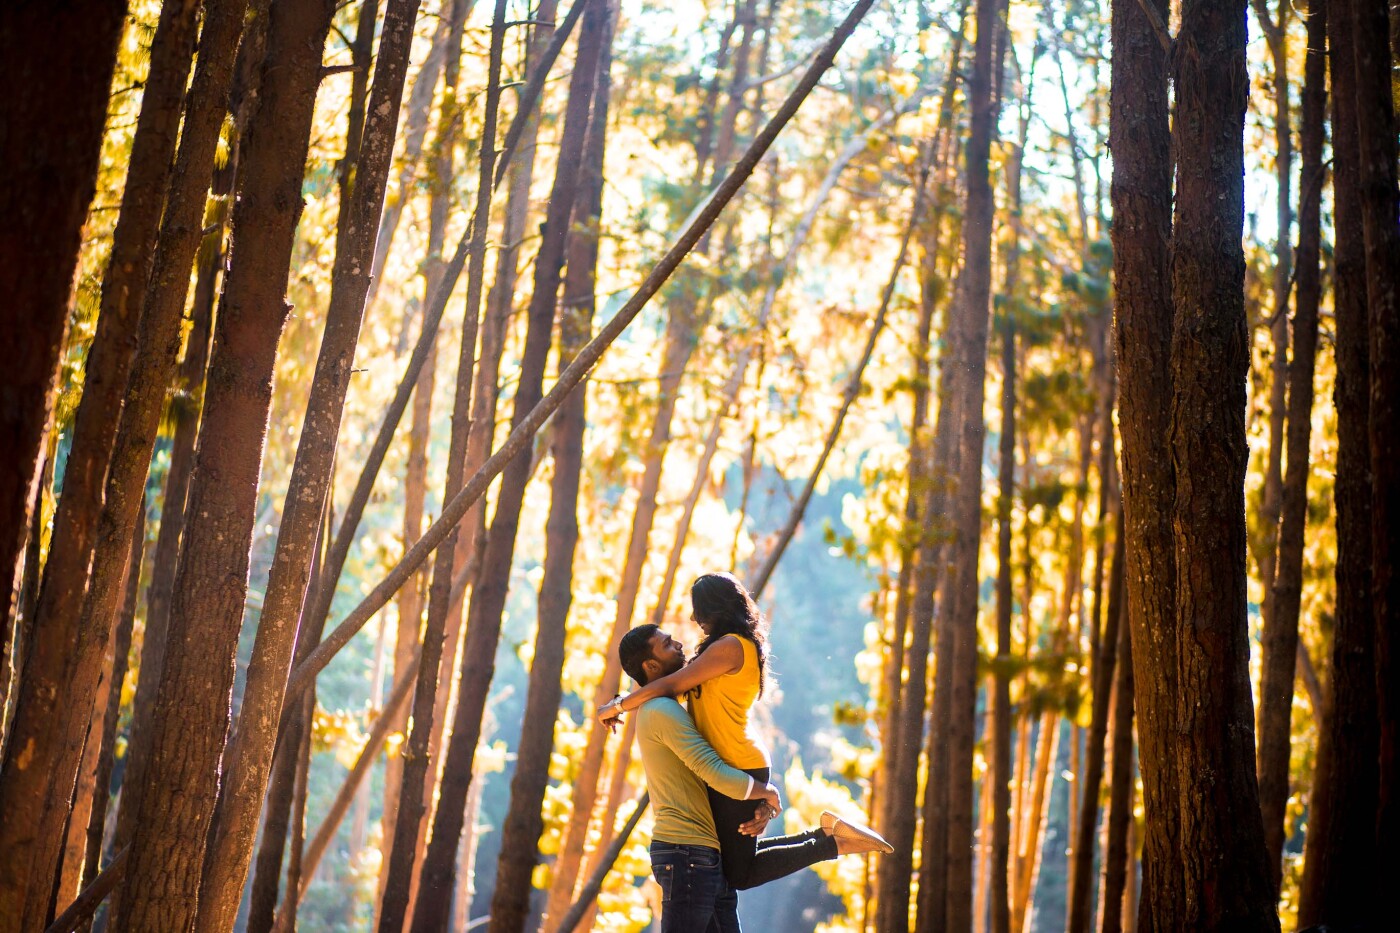  We drove down to Kodaikanal, where we came across the pine forest. I must say, it was a hard climb to get to this spot and we were all pretty exhausted. Surrealism met reality here and then I photographed the lovely couple. All I can say finally is that the drive was worth it.